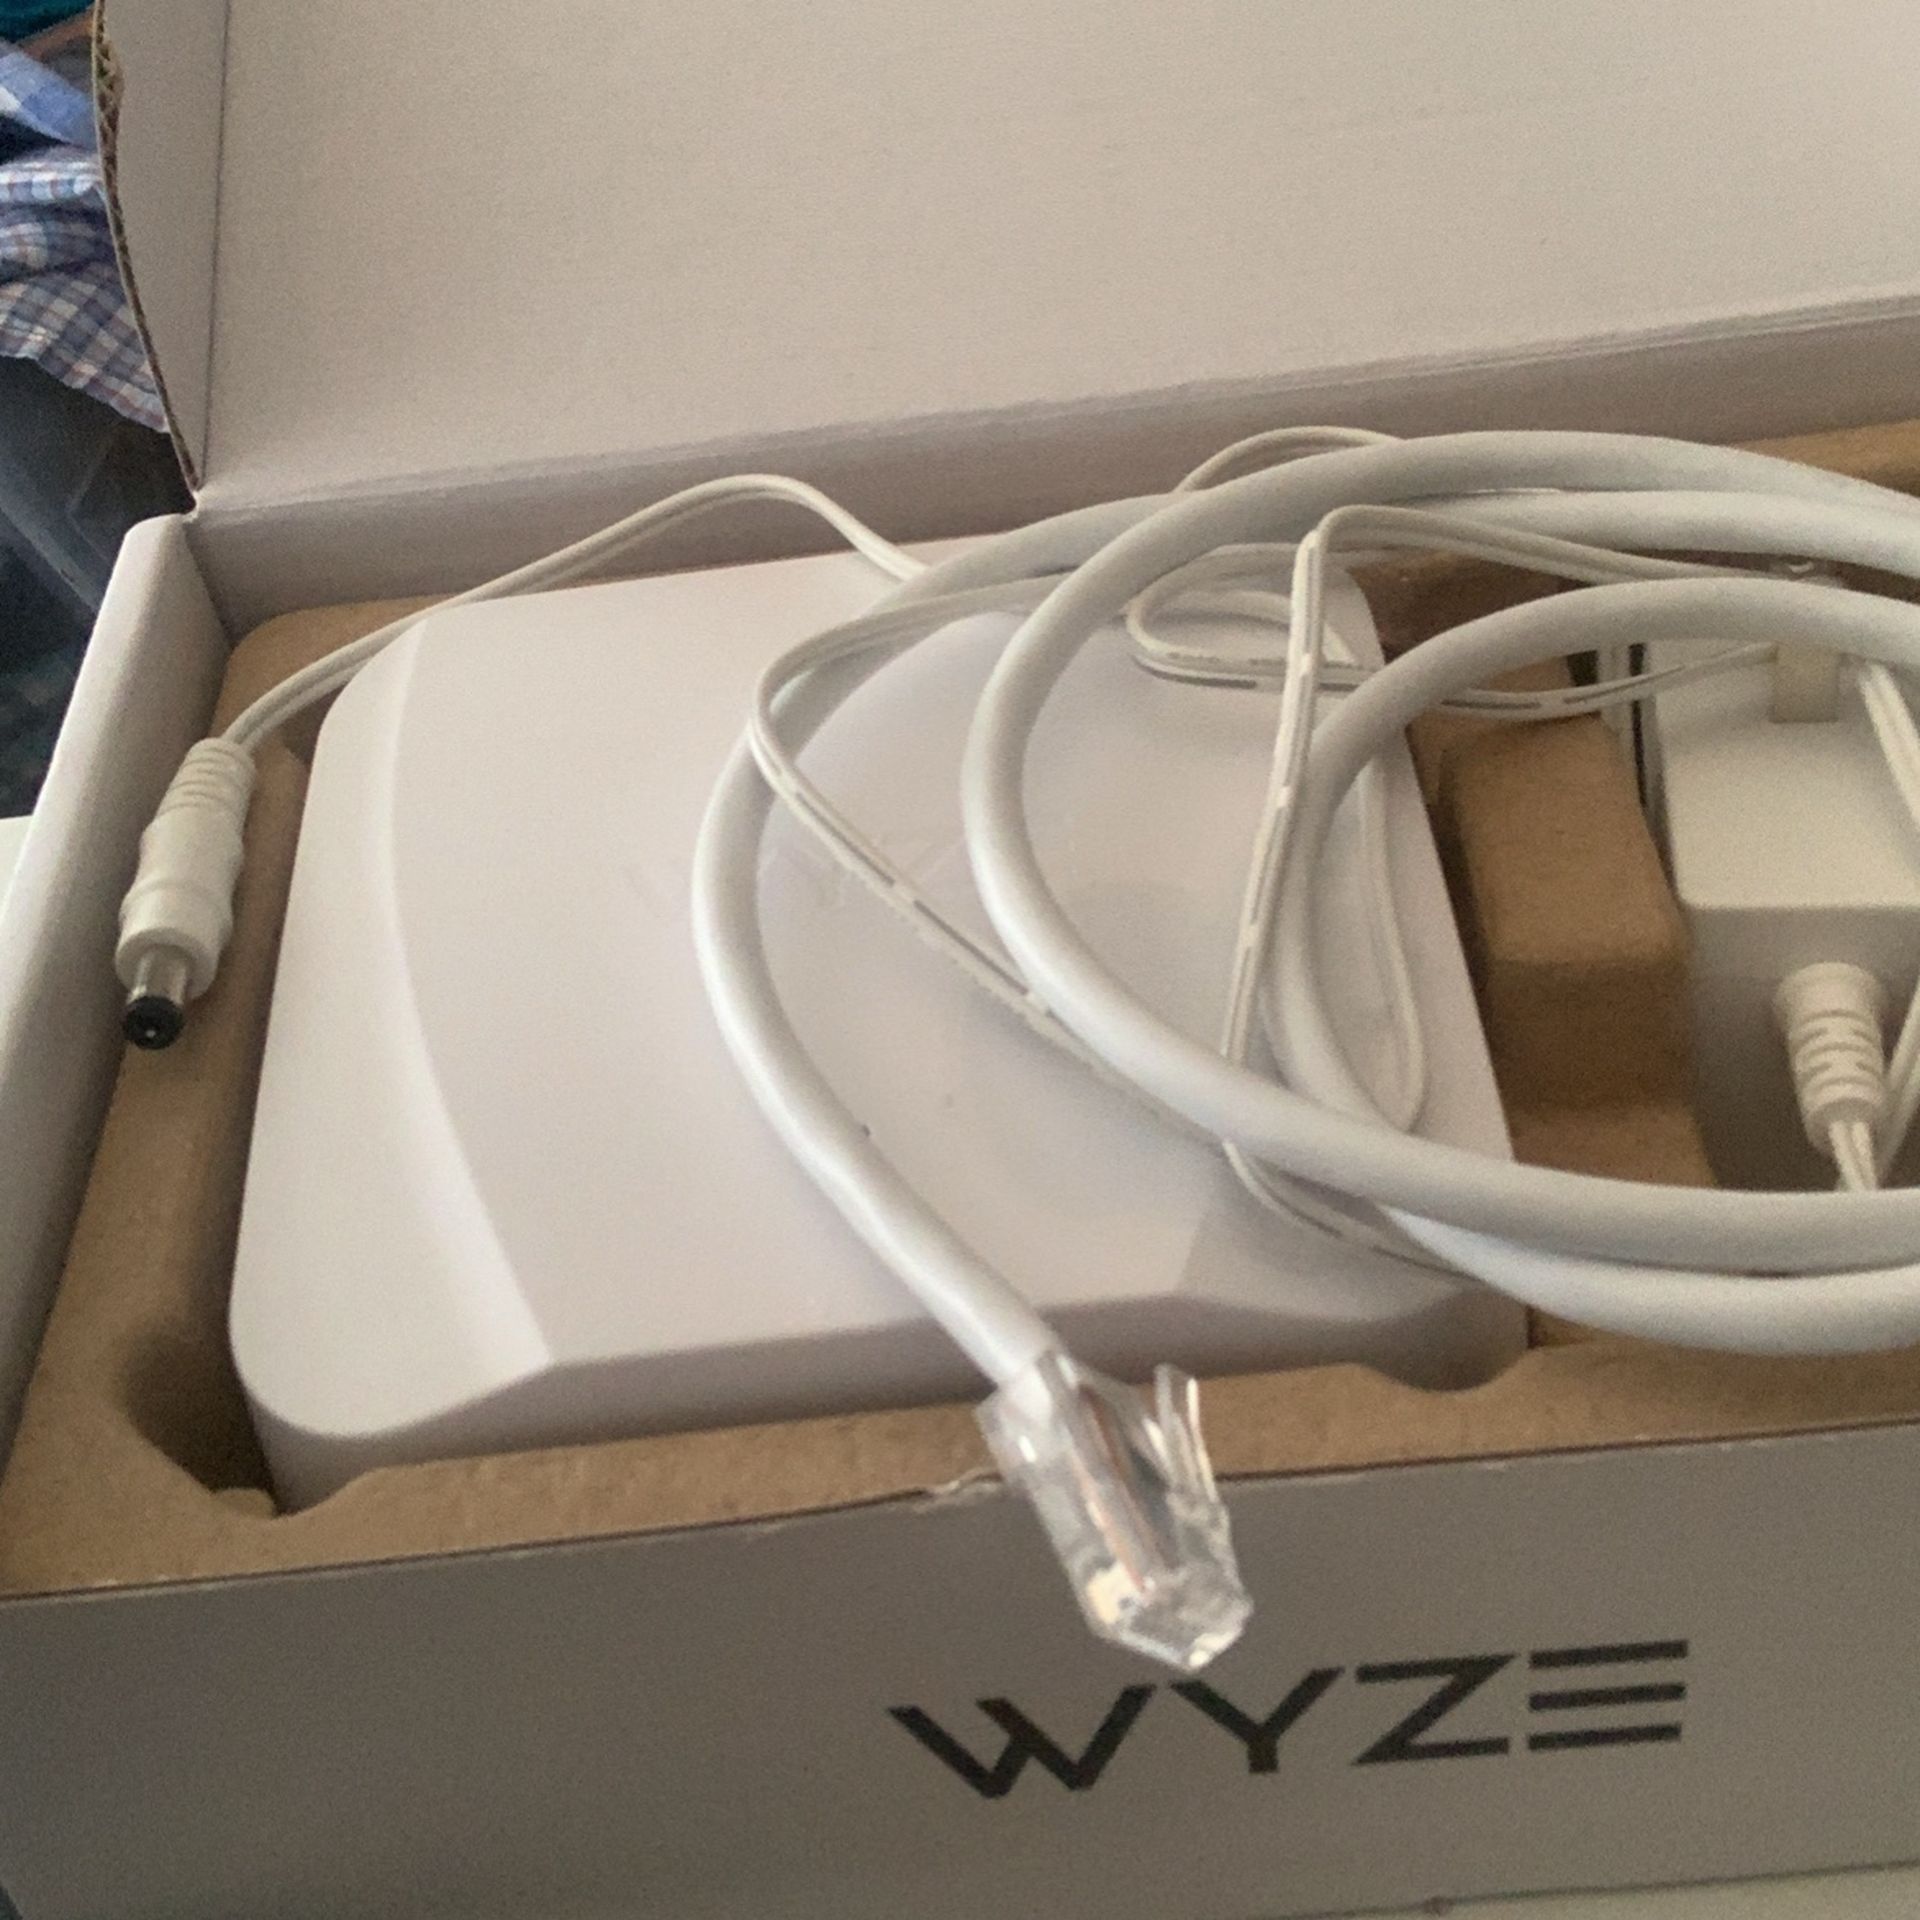 Wyze Mesh Router